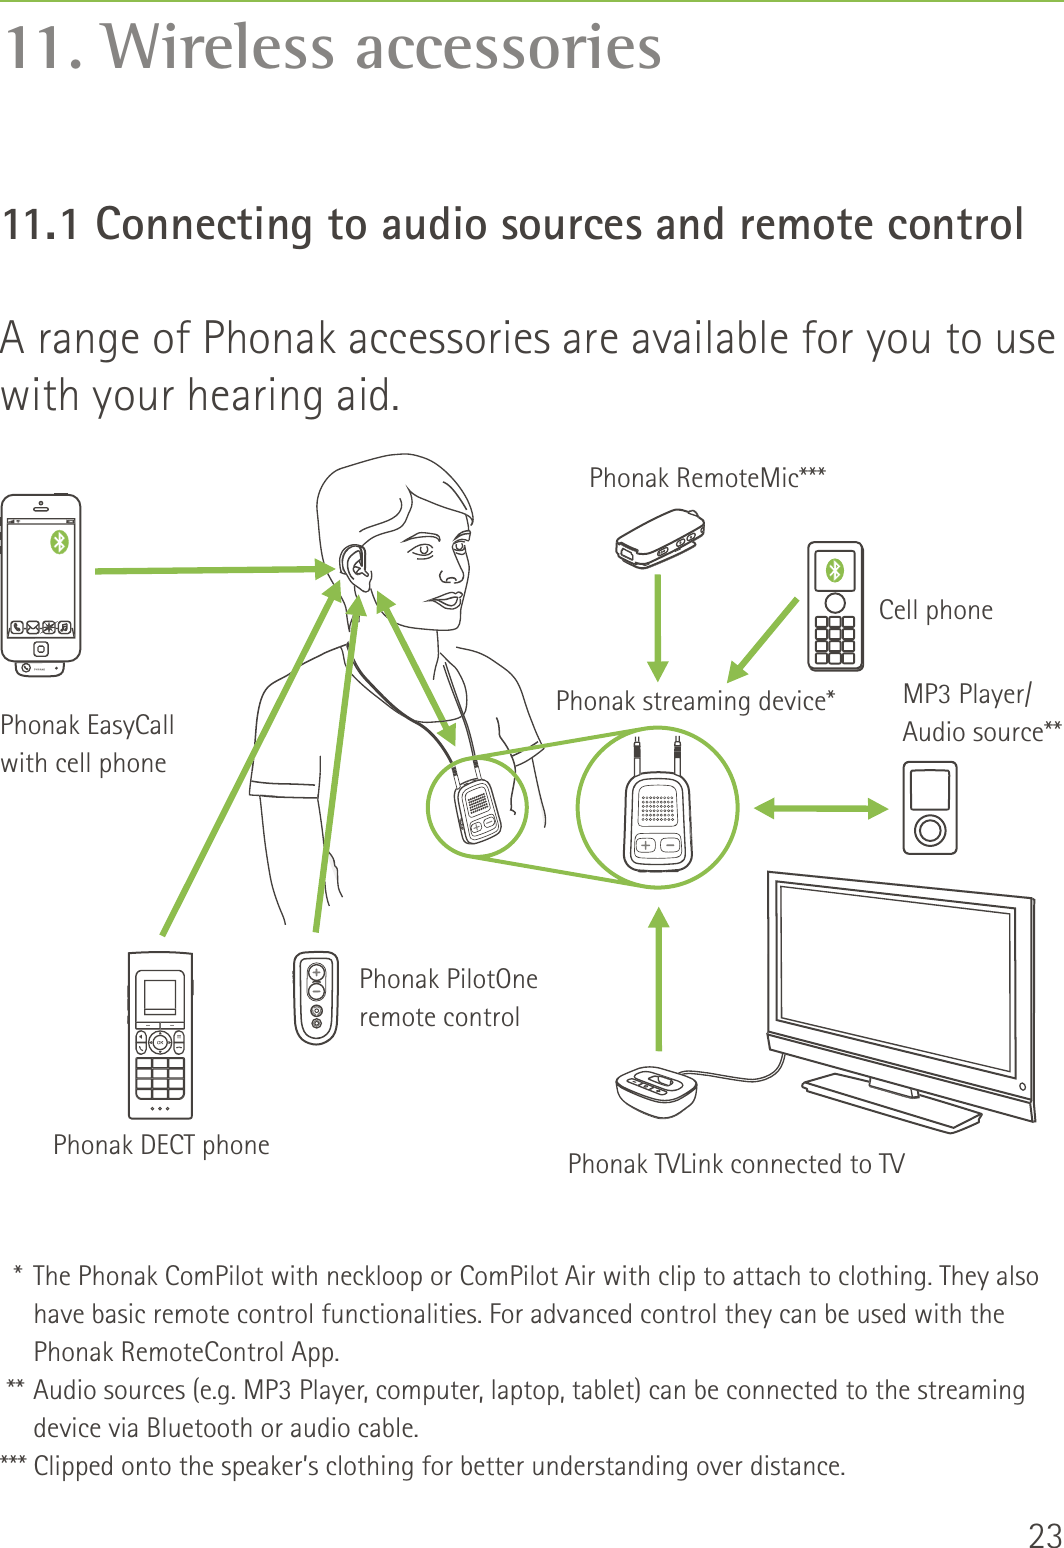 2311. Wireless accessoriesA range of Phonak accessories are available for you to use with your hearing aid.  *  The Phonak ComPilot with neckloop or ComPilot Air with clip to attach to clothing. They also have basic remote control functionalities. For advanced control they can be used with the Phonak RemoteControl App.  ** Audio sources (e.g. MP3 Player, computer, laptop, tablet) can be connected to the streaming device via Bluetooth or audio cable.*** Clipped onto the speaker’s clothing for better understanding over distance.Cell phonePhonak streaming device*Phonak EasyCallwith cell phonePhonak RemoteMic***MP3 Player/Audio source**Phonak TVLink connected to TVPhonak PilotOneremote controlPhonak DECT phone11.1 Connecting to audio sources and remote control